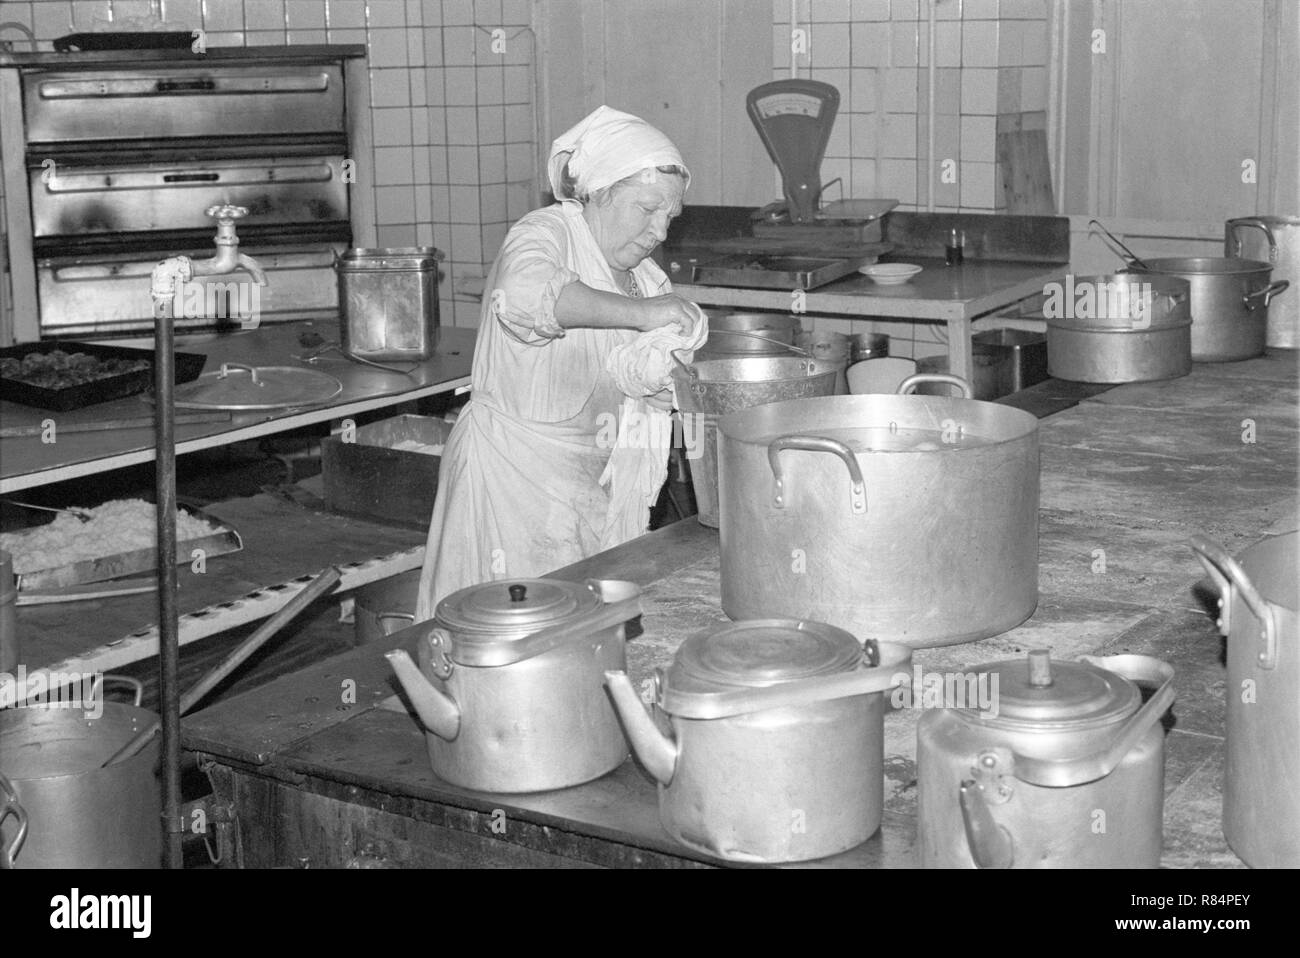 Moscow, USSR - November 23, 1989: Canteen in the Ministry of the Automotive Industry of the USSR. Elderly woman works in the kitchen of the canteen Stock Photo